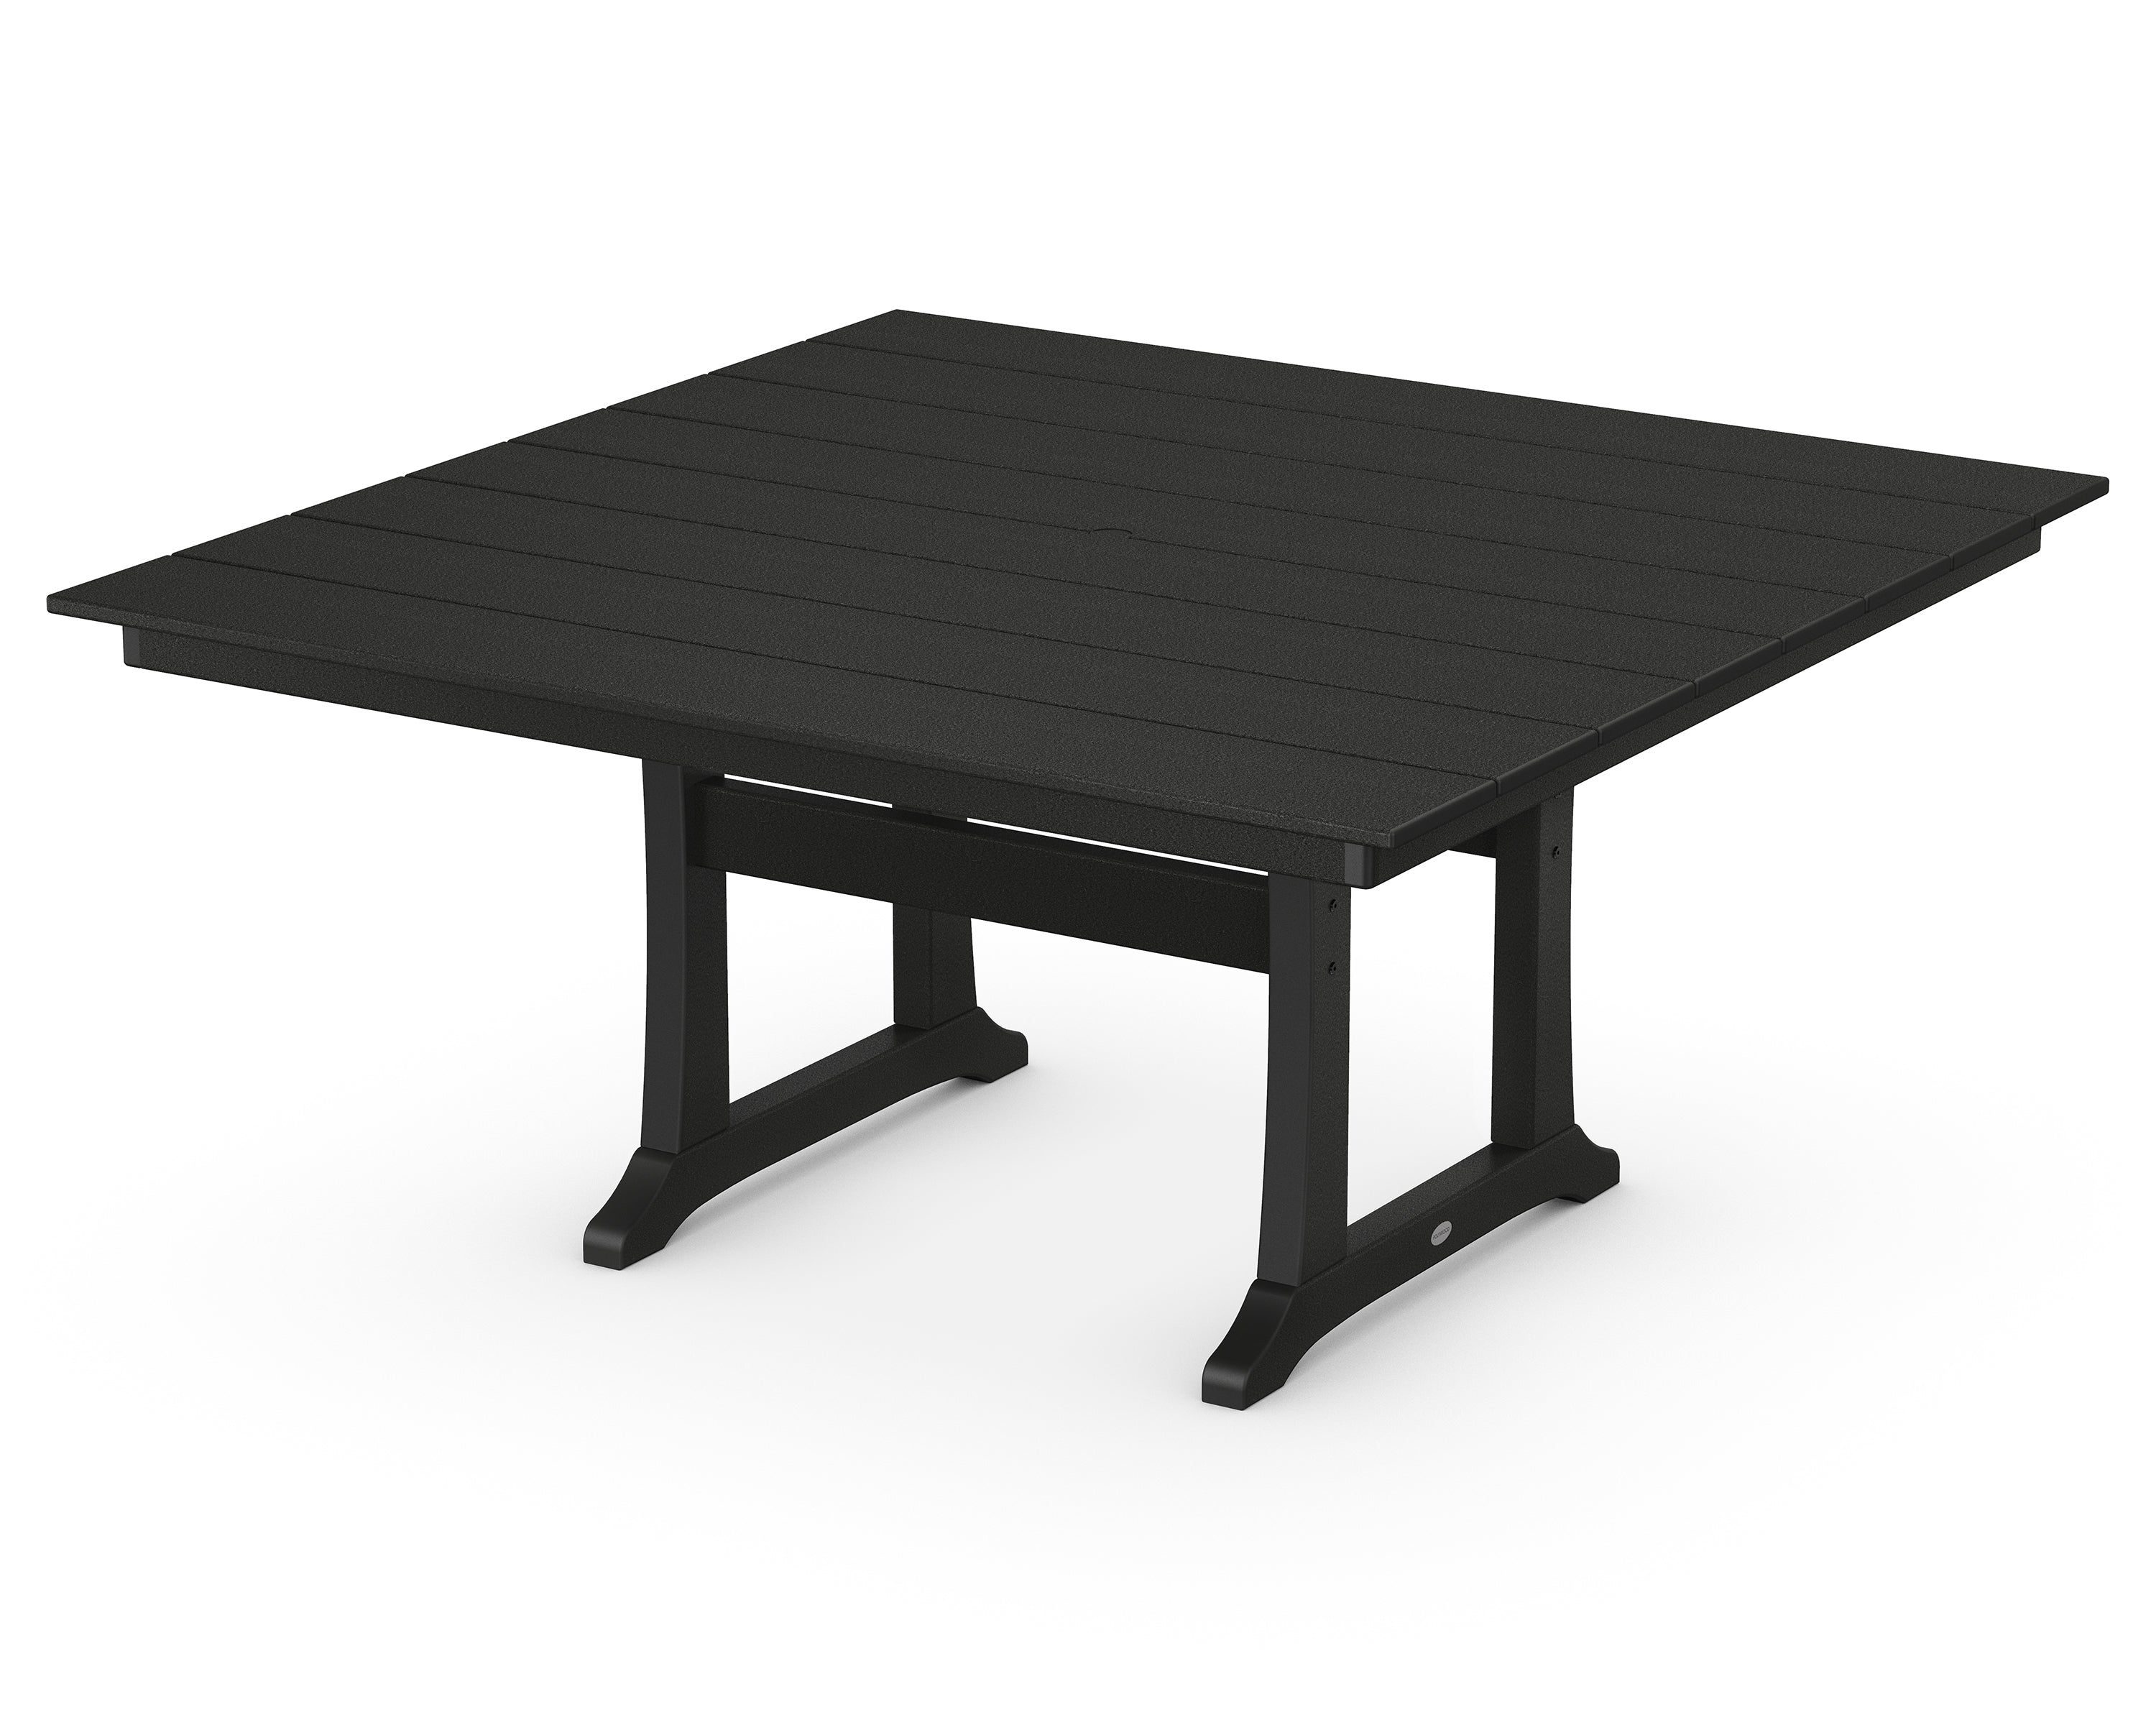 POLYWOOD Farmhouse Trestle 59 inch Square Dining Table Outdoor Tables Black 12041636